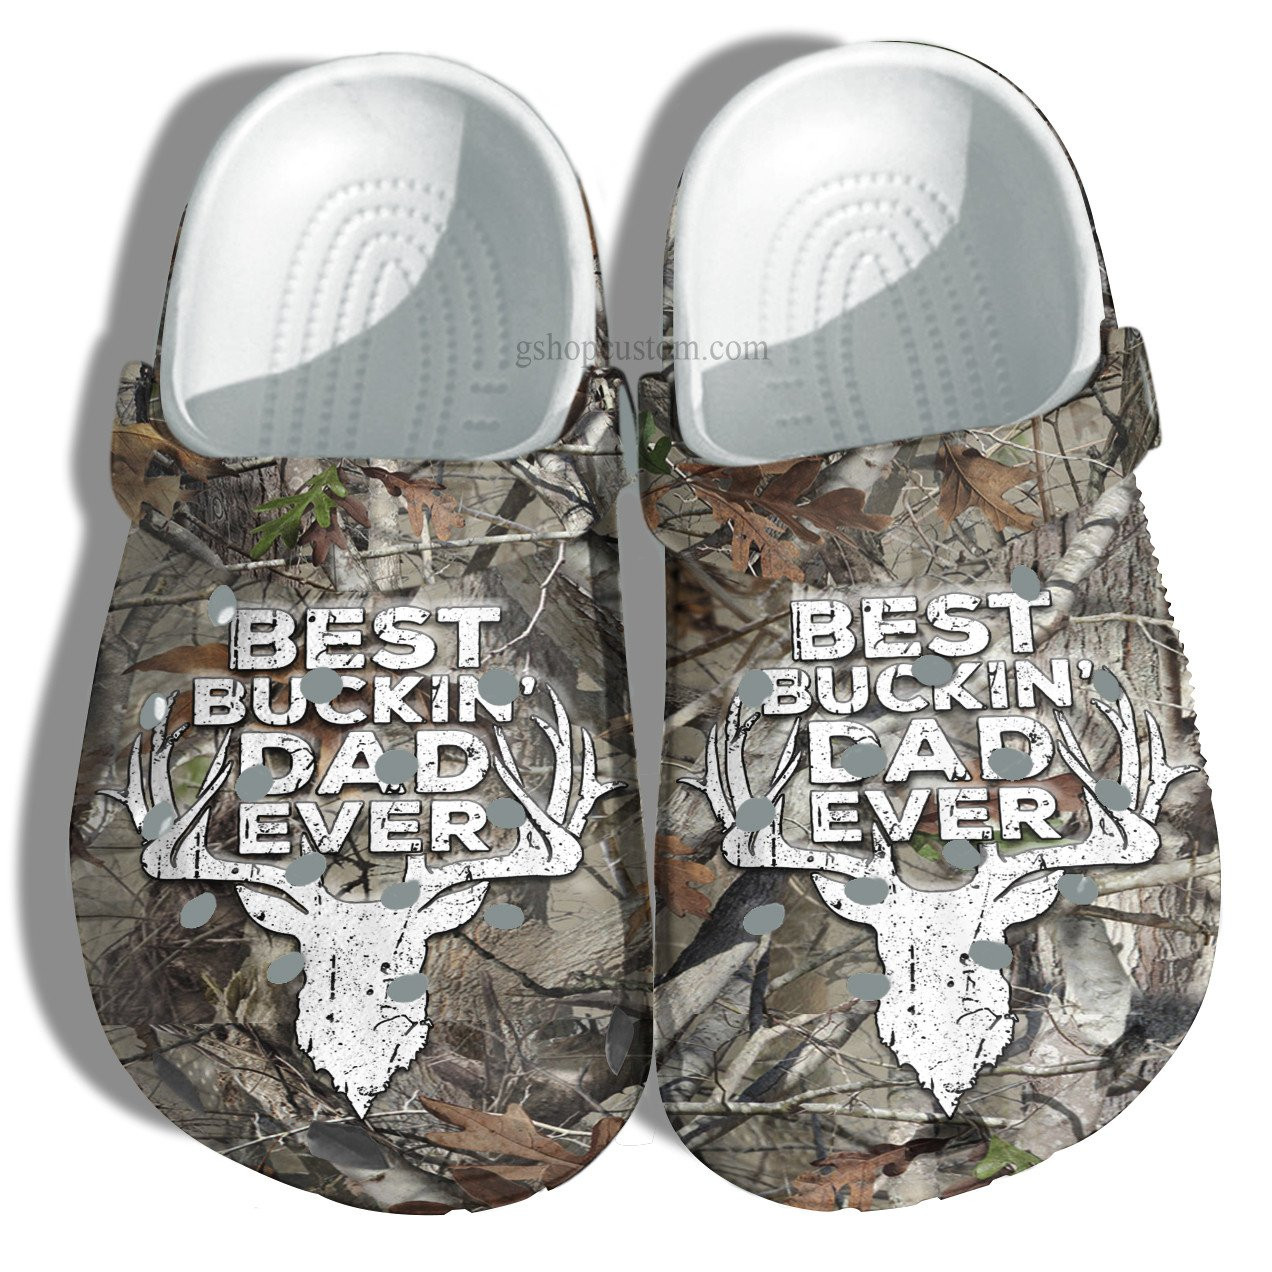 Best Buckin Dad Ever Deer Hunter Croc Shoes Gift Grandpa Father Day- Deer Hunting Camouflage Army Crocs Shoes